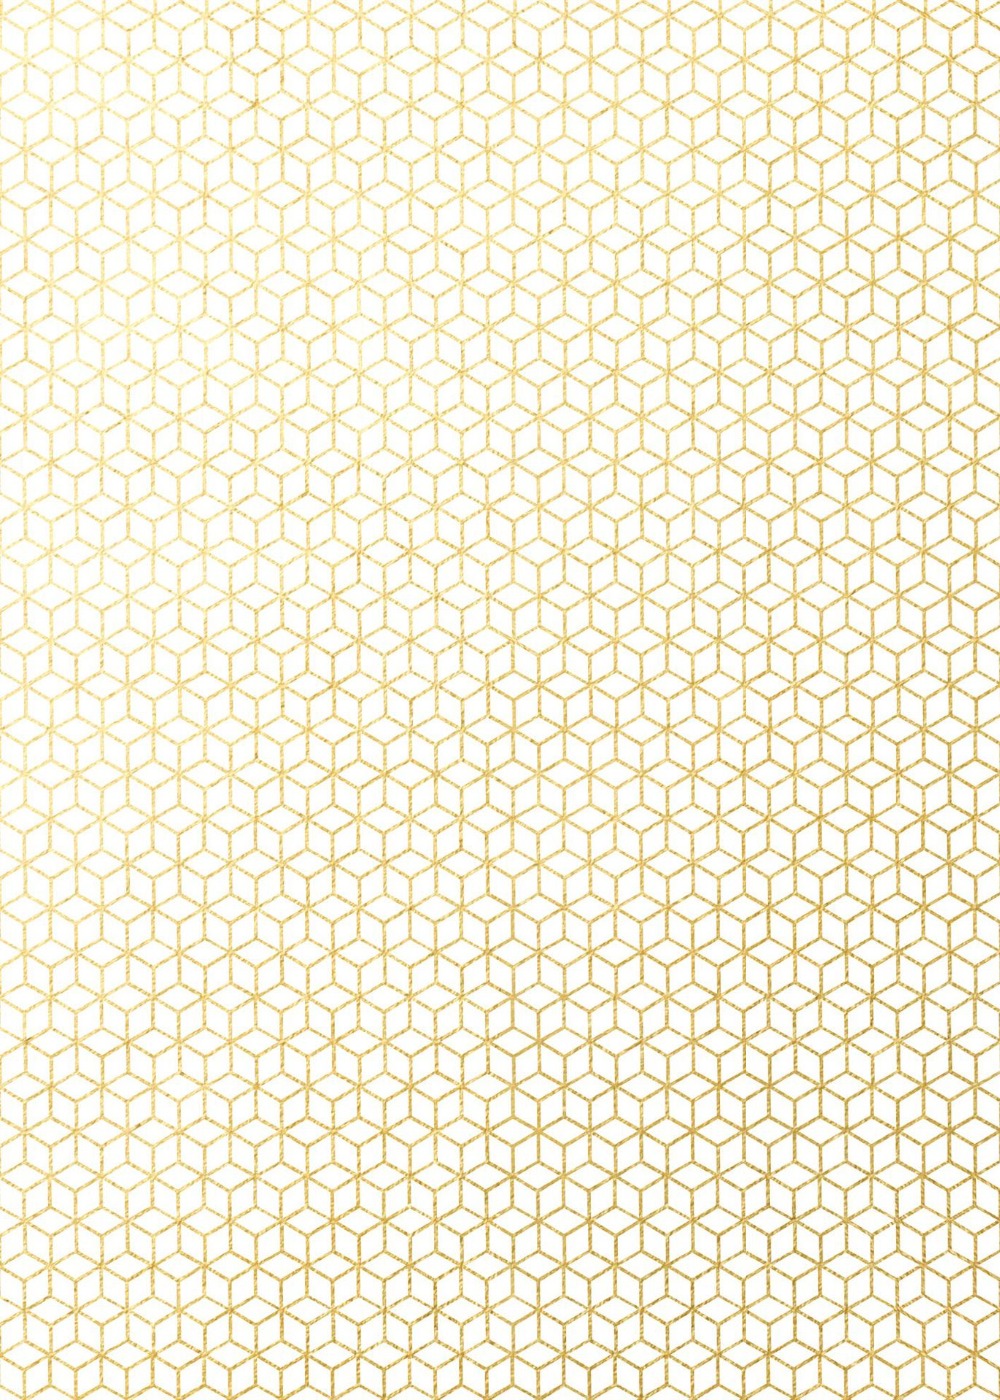 10pcs/lot Golden Geometric Pattern Paper Christmas Gift Wrapping Paper New Year Gifts Boxes Packaging Paper DIY Crafts Supplies